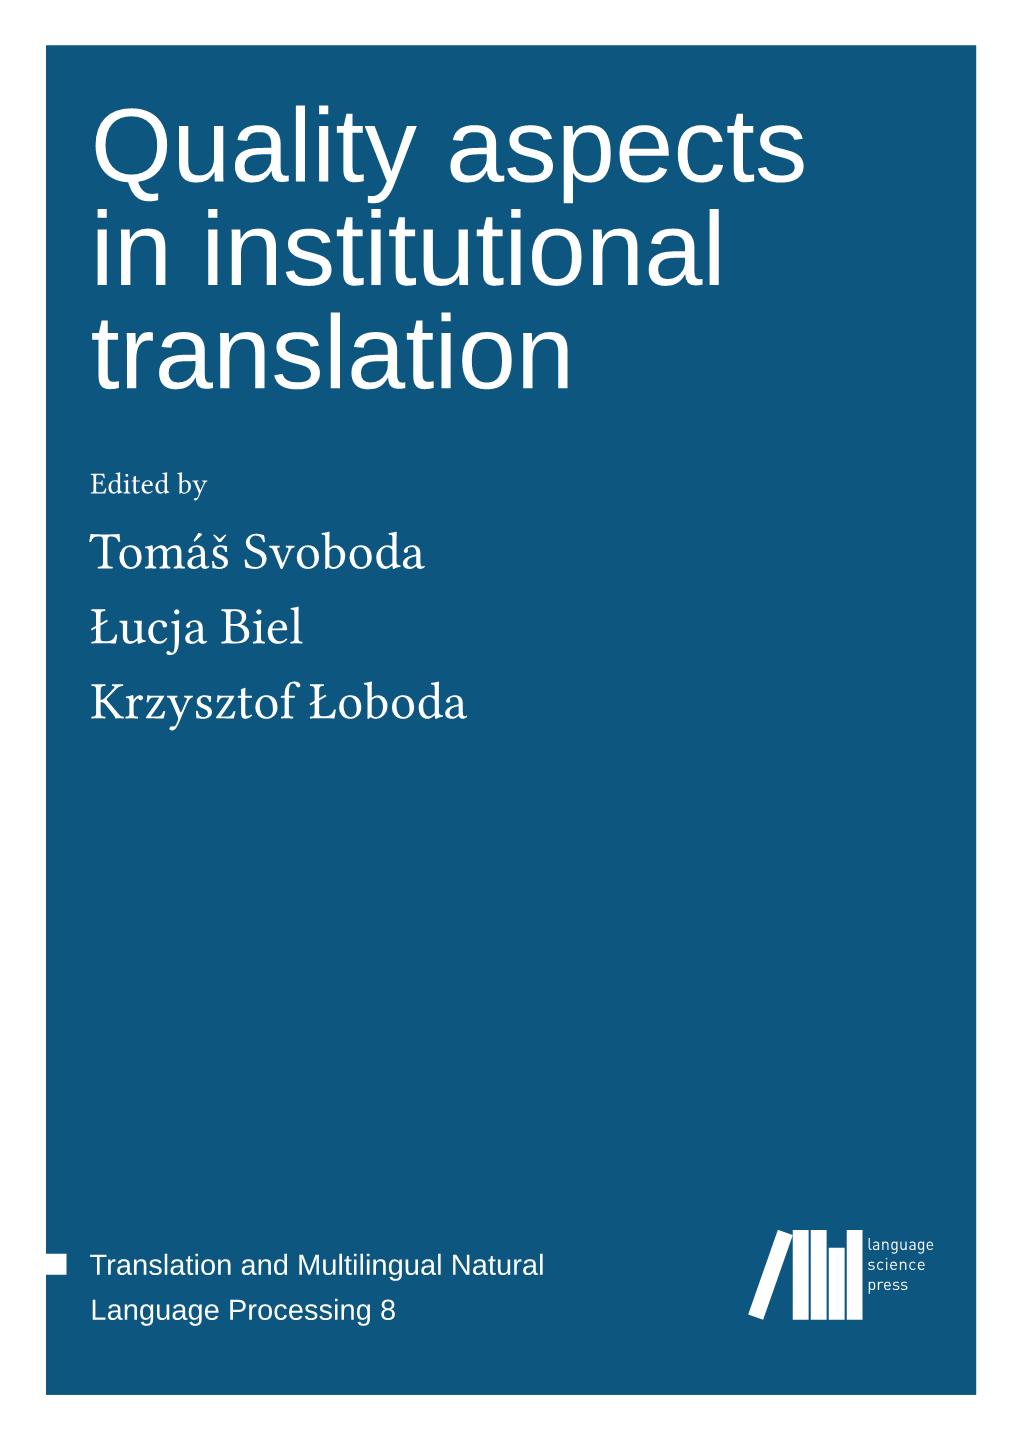 Quality Aspects in Institutional Translation